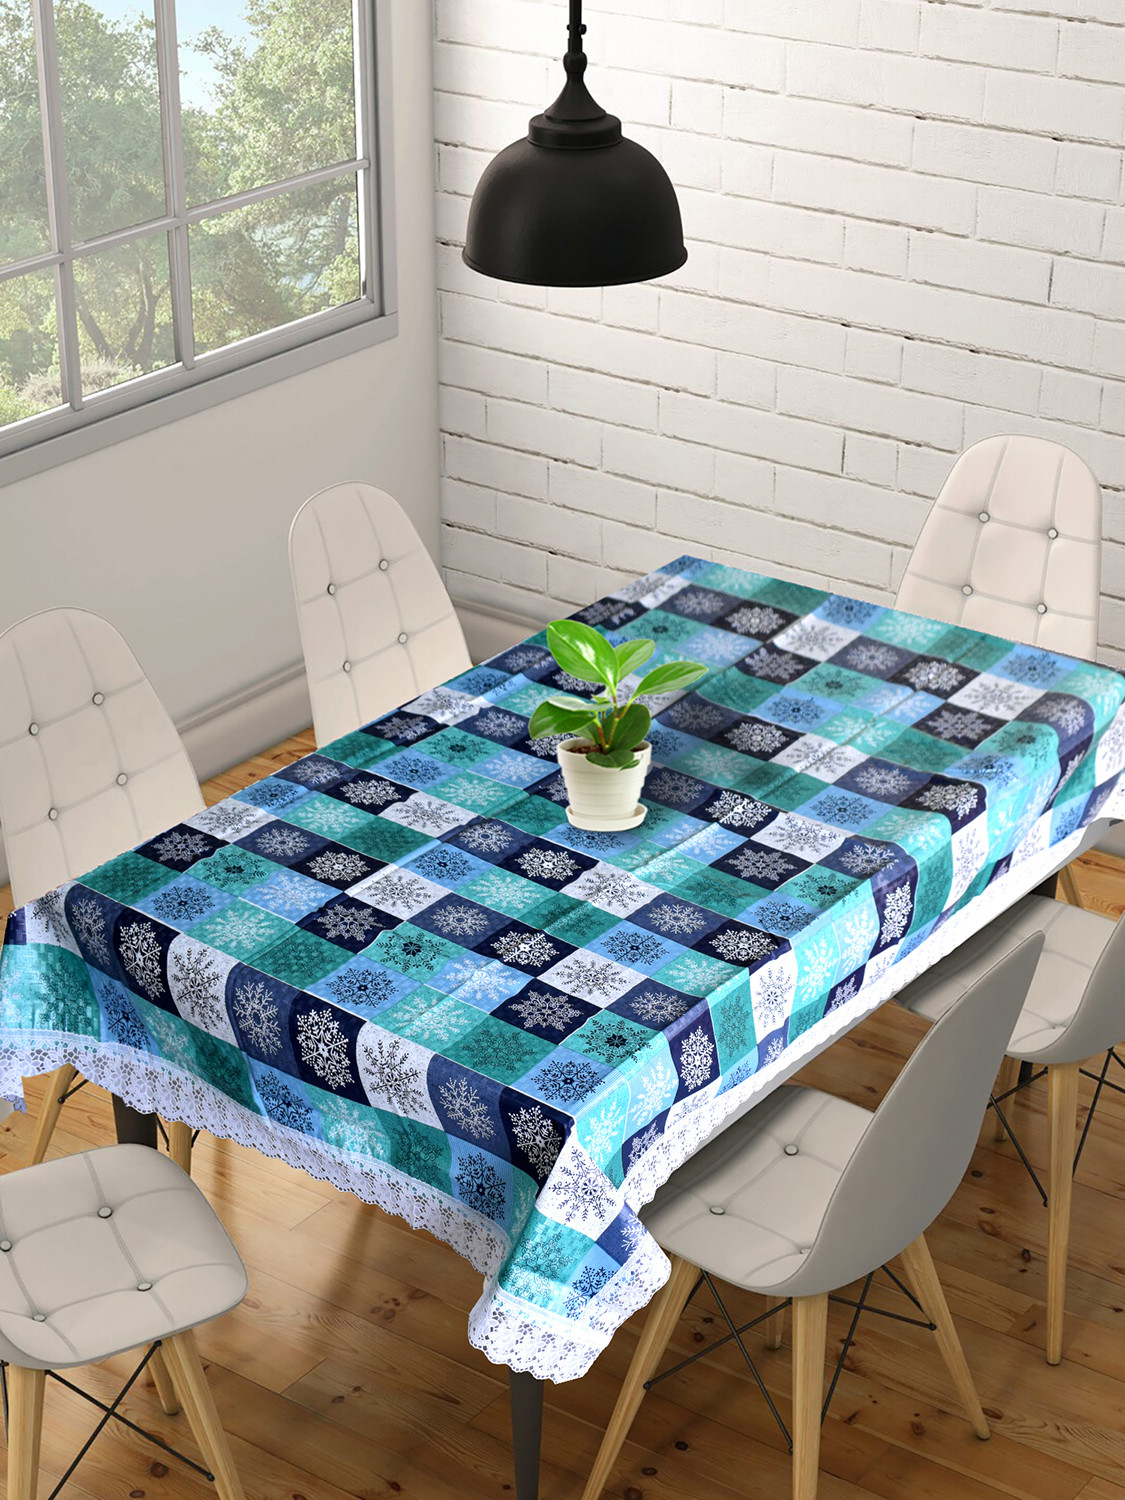 Kuber Industries Multicheck Printed PVC 6 Seater Dinning Table Cover, Protector With White Lace Border, 60